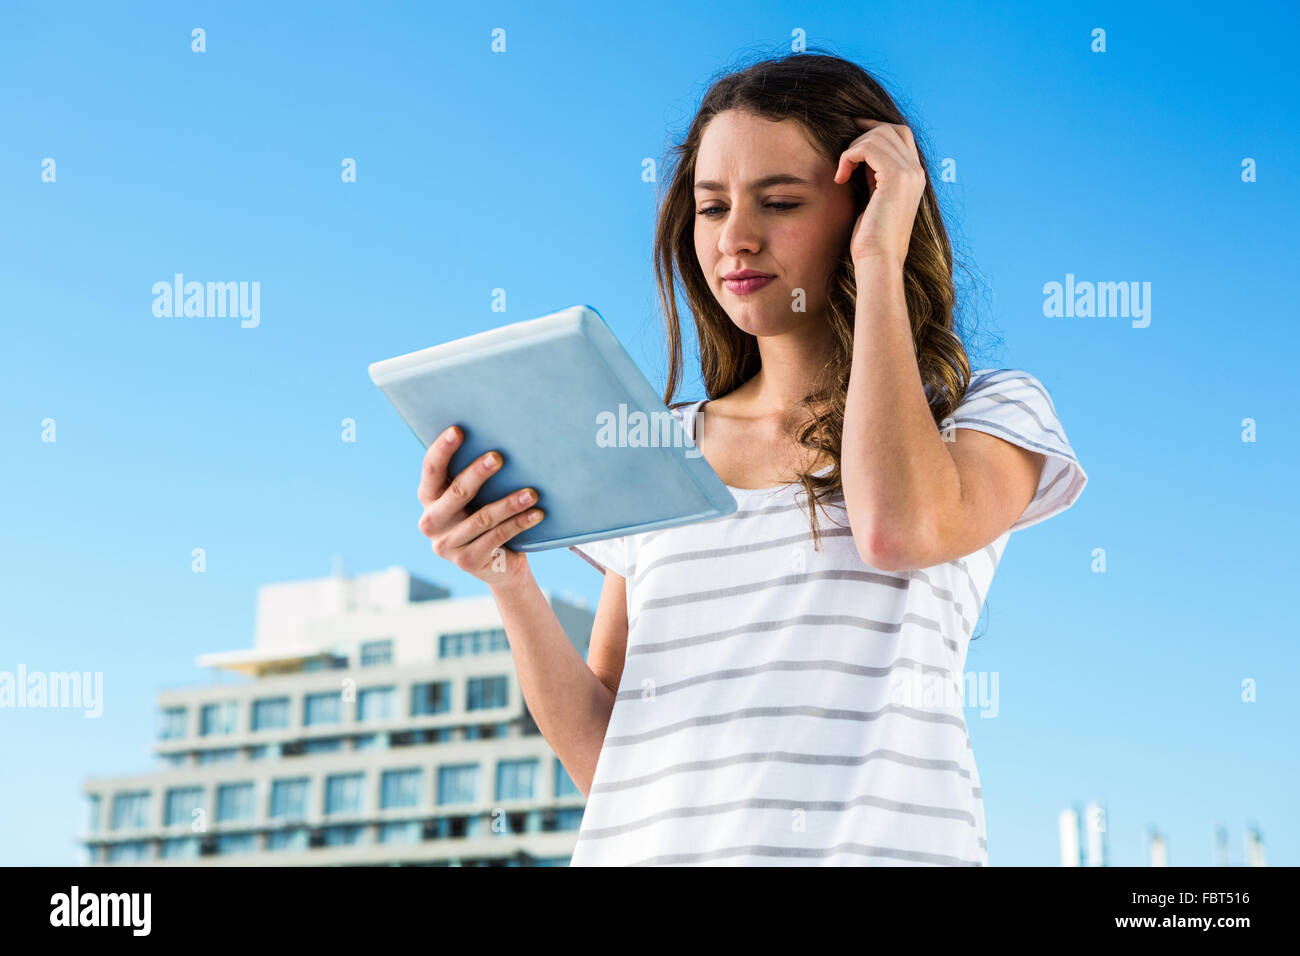 Young girl using her tablet Stock Photo